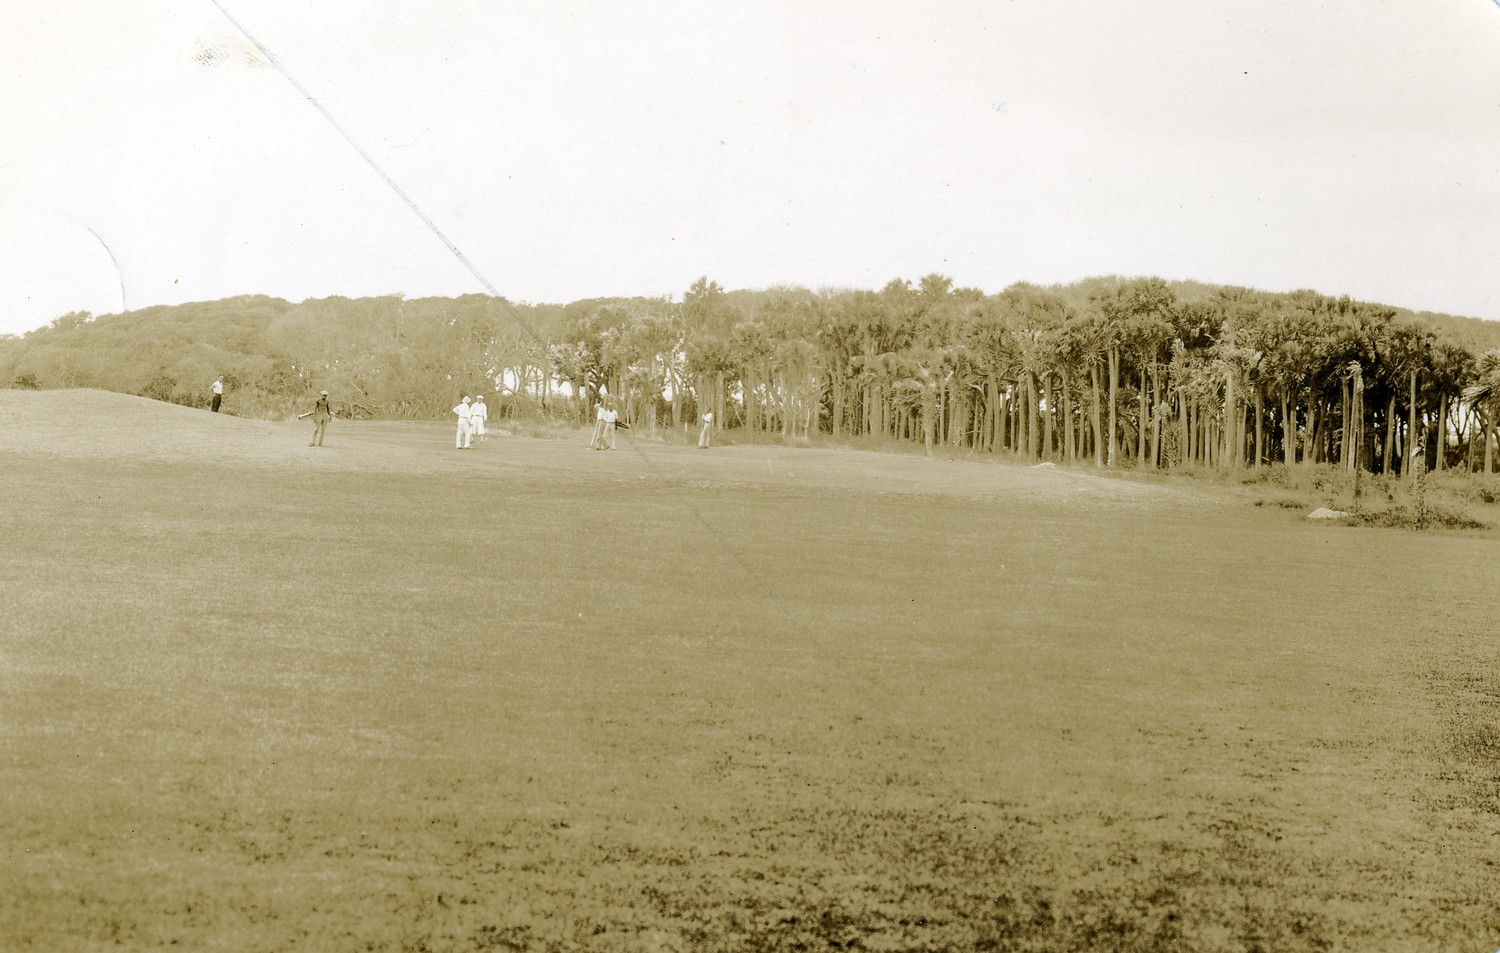 Golfers play on the 15th fairway of the Jacksonville Beach Golf Links course (later to become the Ponte Vedra Inn & Club.